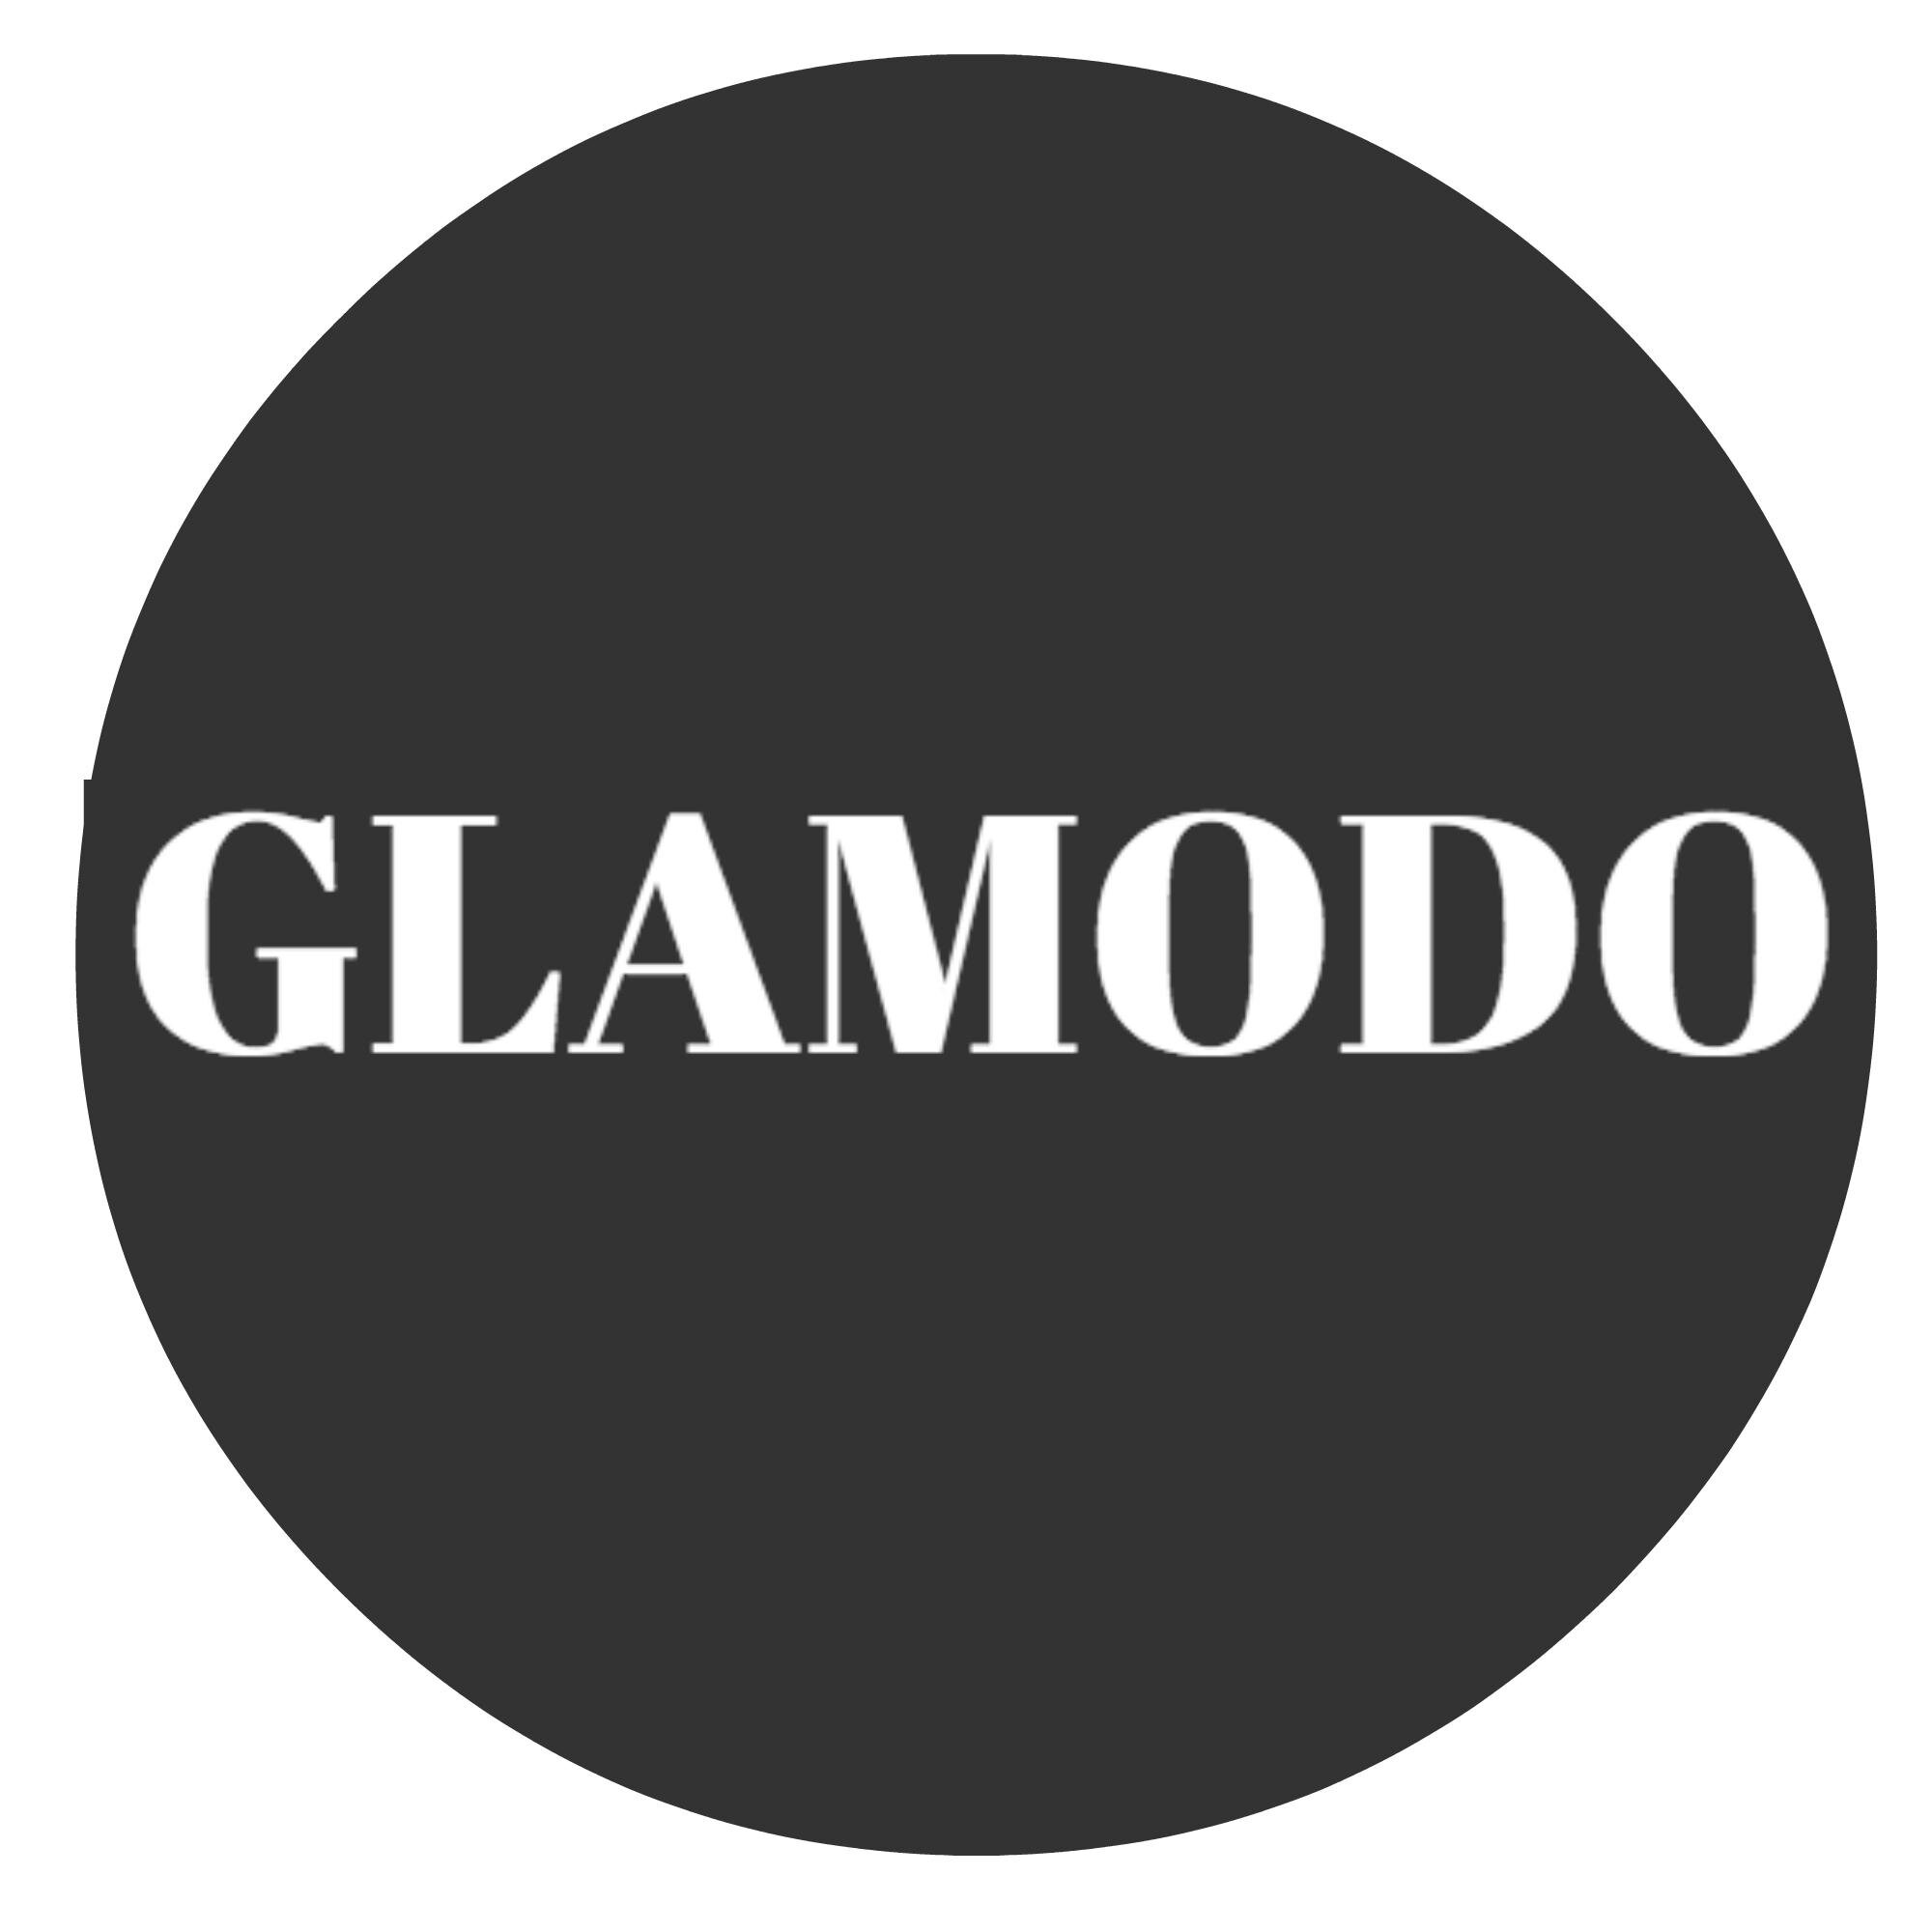 Look Better. Know More. Get Noticed. Glamodo is a new site for sharing images and rating makeup!